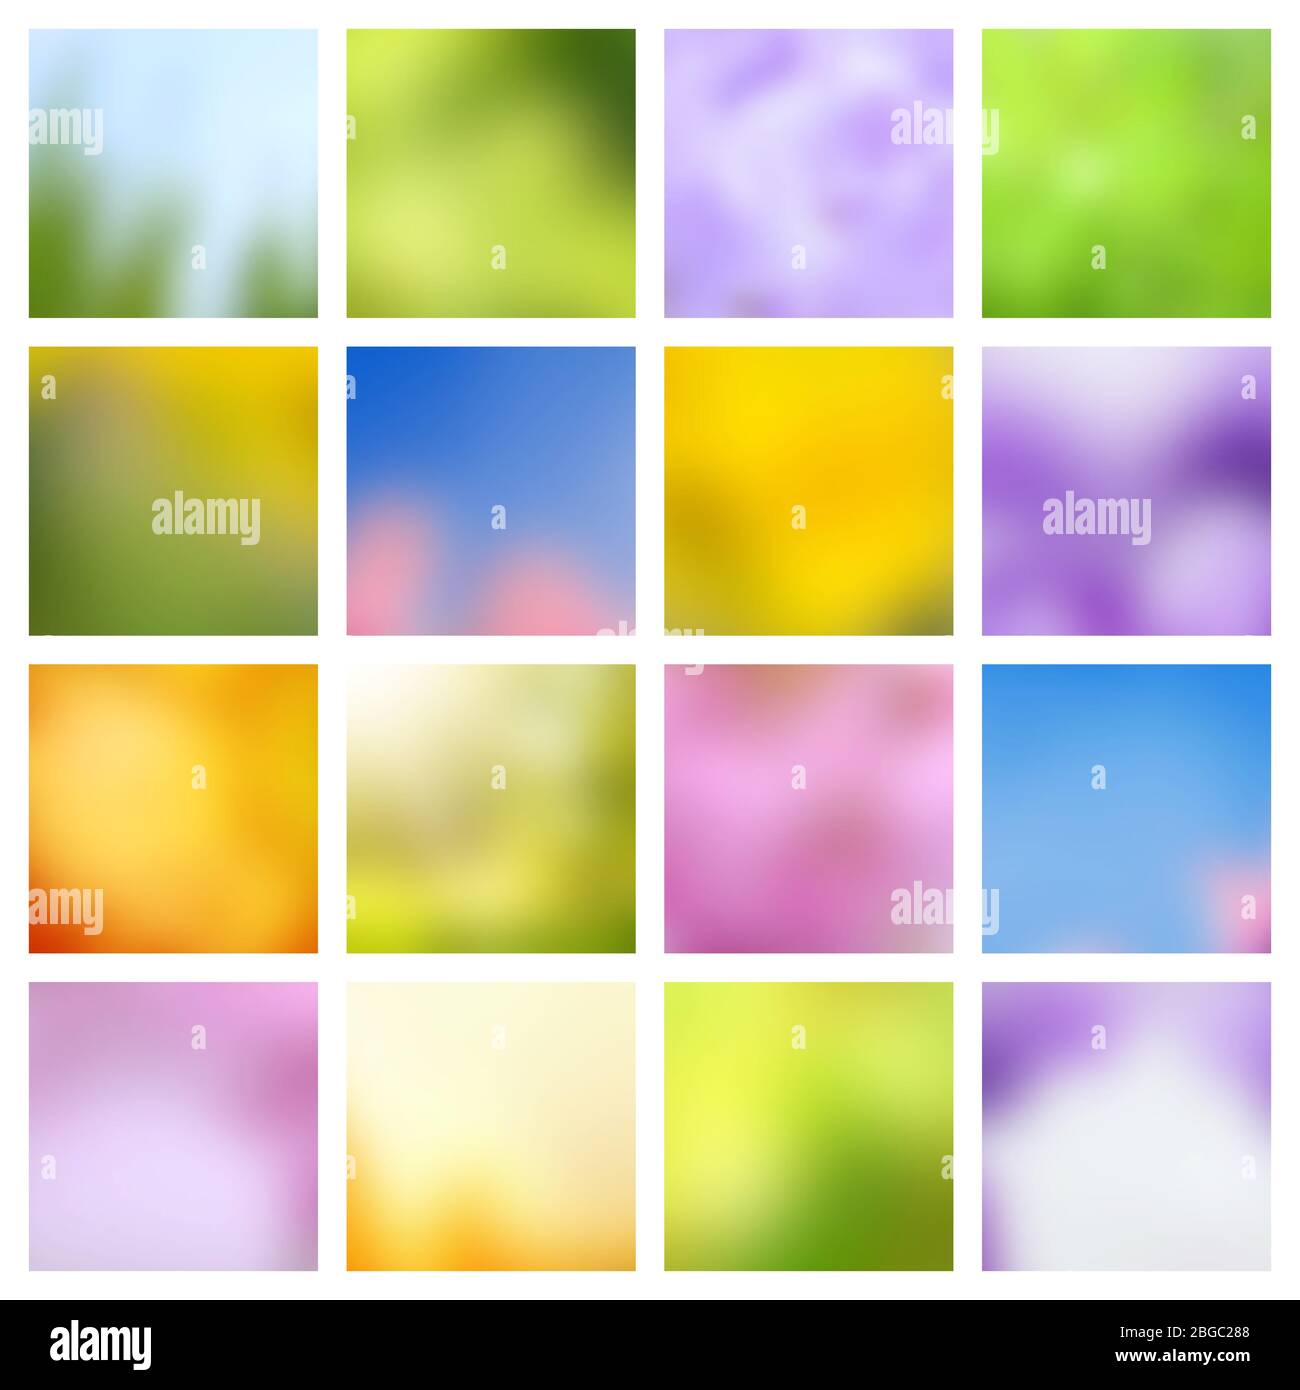 Abstract nature spring and summer green and blue blurred vector backgrounds. Summer and spring wallpaper nature collection illustration Stock Vector